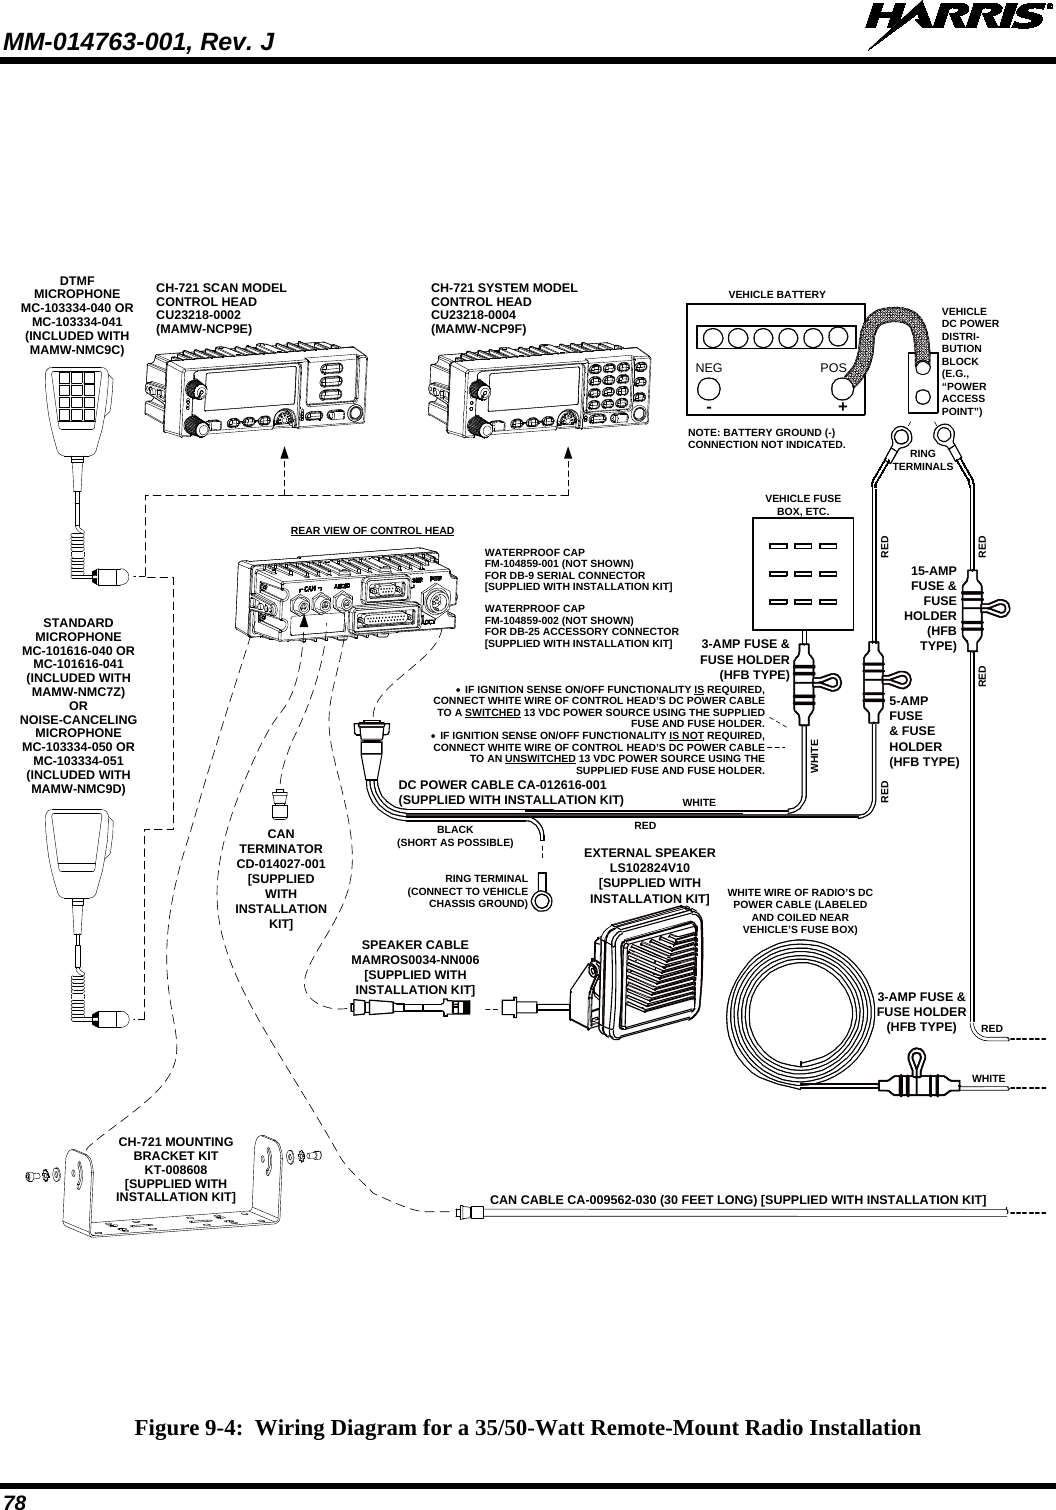 MM-014763-001, Rev. J   78  Figure 9-4:  Wiring Diagram for a 35/50-Watt Remote-Mount Radio Installation CH-721 SCAN MODELCONTROL HEADCU23218-0002(MAMW-NCP9E)CH-721 SYSTEM MODELCONTROL HEADCU23218-0004(MAMW-NCP9F)DTMFMICROPHONEMC-103334-040 ORMC-103334-041(INCLUDED WITHMAMW-NMC9C)STANDARD MICROPHONEMC-101616-040 ORMC-101616-041(INCLUDED WITHMAMW-NMC7Z)ORNOISE-CANCELINGMICROPHONEMC-103334-050 ORMC-103334-051(INCLUDED WITHMAMW-NMC9D)CH-721 MOUNTING BRACKET KITKT-008608[SUPPLIED WITH INSTALLATION KIT]•  IF IGNITION SENSE ON/OFF FUNCTIONALITY IS REQUIRED, CONNECT WHITE WIRE OF CONTROL HEAD’S DC POWER CABLE TO A SWITCHED 13 VDC POWER SOURCE USING THE SUPPLIED FUSE AND FUSE HOLDER.•  IF IGNITION SENSE ON/OFF FUNCTIONALITY IS NOT REQUIRED, CONNECT WHITE WIRE OF CONTROL HEAD’S DC POWER CABLE TO AN UNSWITCHED 13 VDC POWER SOURCE USING THE SUPPLIED FUSE AND FUSE HOLDER.WATERPROOF CAPFM-104859-001 (NOT SHOWN)FOR DB-9 SERIAL CONNECTOR[SUPPLIED WITH INSTALLATION KIT]WATERPROOF CAPFM-104859-002 (NOT SHOWN)FOR DB-25 ACCESSORY CONNECTOR[SUPPLIED WITH INSTALLATION KIT]REAR VIEW OF CONTROL HEADNEG POS3-AMP FUSE &amp; FUSE HOLDER (HFB TYPE) REDRED RED5-AMPFUSE&amp; FUSE HOLDER (HFB TYPE)3-AMP FUSE &amp; FUSE HOLDER(HFB TYPE)15-AMPFUSE &amp; FUSE HOLDER(HFB TYPE)REDWHITEREDRINGTERMINALSVEHICLEDC POWER DISTRI-BUTION BLOCK(E.G., “POWER ACCESS POINT”)VEHICLE BATTERY+-NOTE: BATTERY GROUND (-) CONNECTION NOT INDICATED.CAN TERMINATORCD-014027-001[SUPPLIED WITH INSTALLATION KIT]REDWHITEBLACK(SHORT AS POSSIBLE)RING TERMINAL (CONNECT TO VEHICLE CHASSIS GROUND)CAN CABLE CA-009562-030 (30 FEET LONG) [SUPPLIED WITH INSTALLATION KIT]SPEAKER CABLEMAMROS0034-NN006[SUPPLIED WITHINSTALLATION KIT]EXTERNAL SPEAKERLS102824V10[SUPPLIED WITHINSTALLATION KIT] WHITE WIRE OF RADIO’S DC POWER CABLE (LABELED AND COILED NEAR VEHICLE’S FUSE BOX)DC POWER CABLE CA-012616-001(SUPPLIED WITH INSTALLATION KIT)VEHICLE FUSE BOX, ETC.WHITE